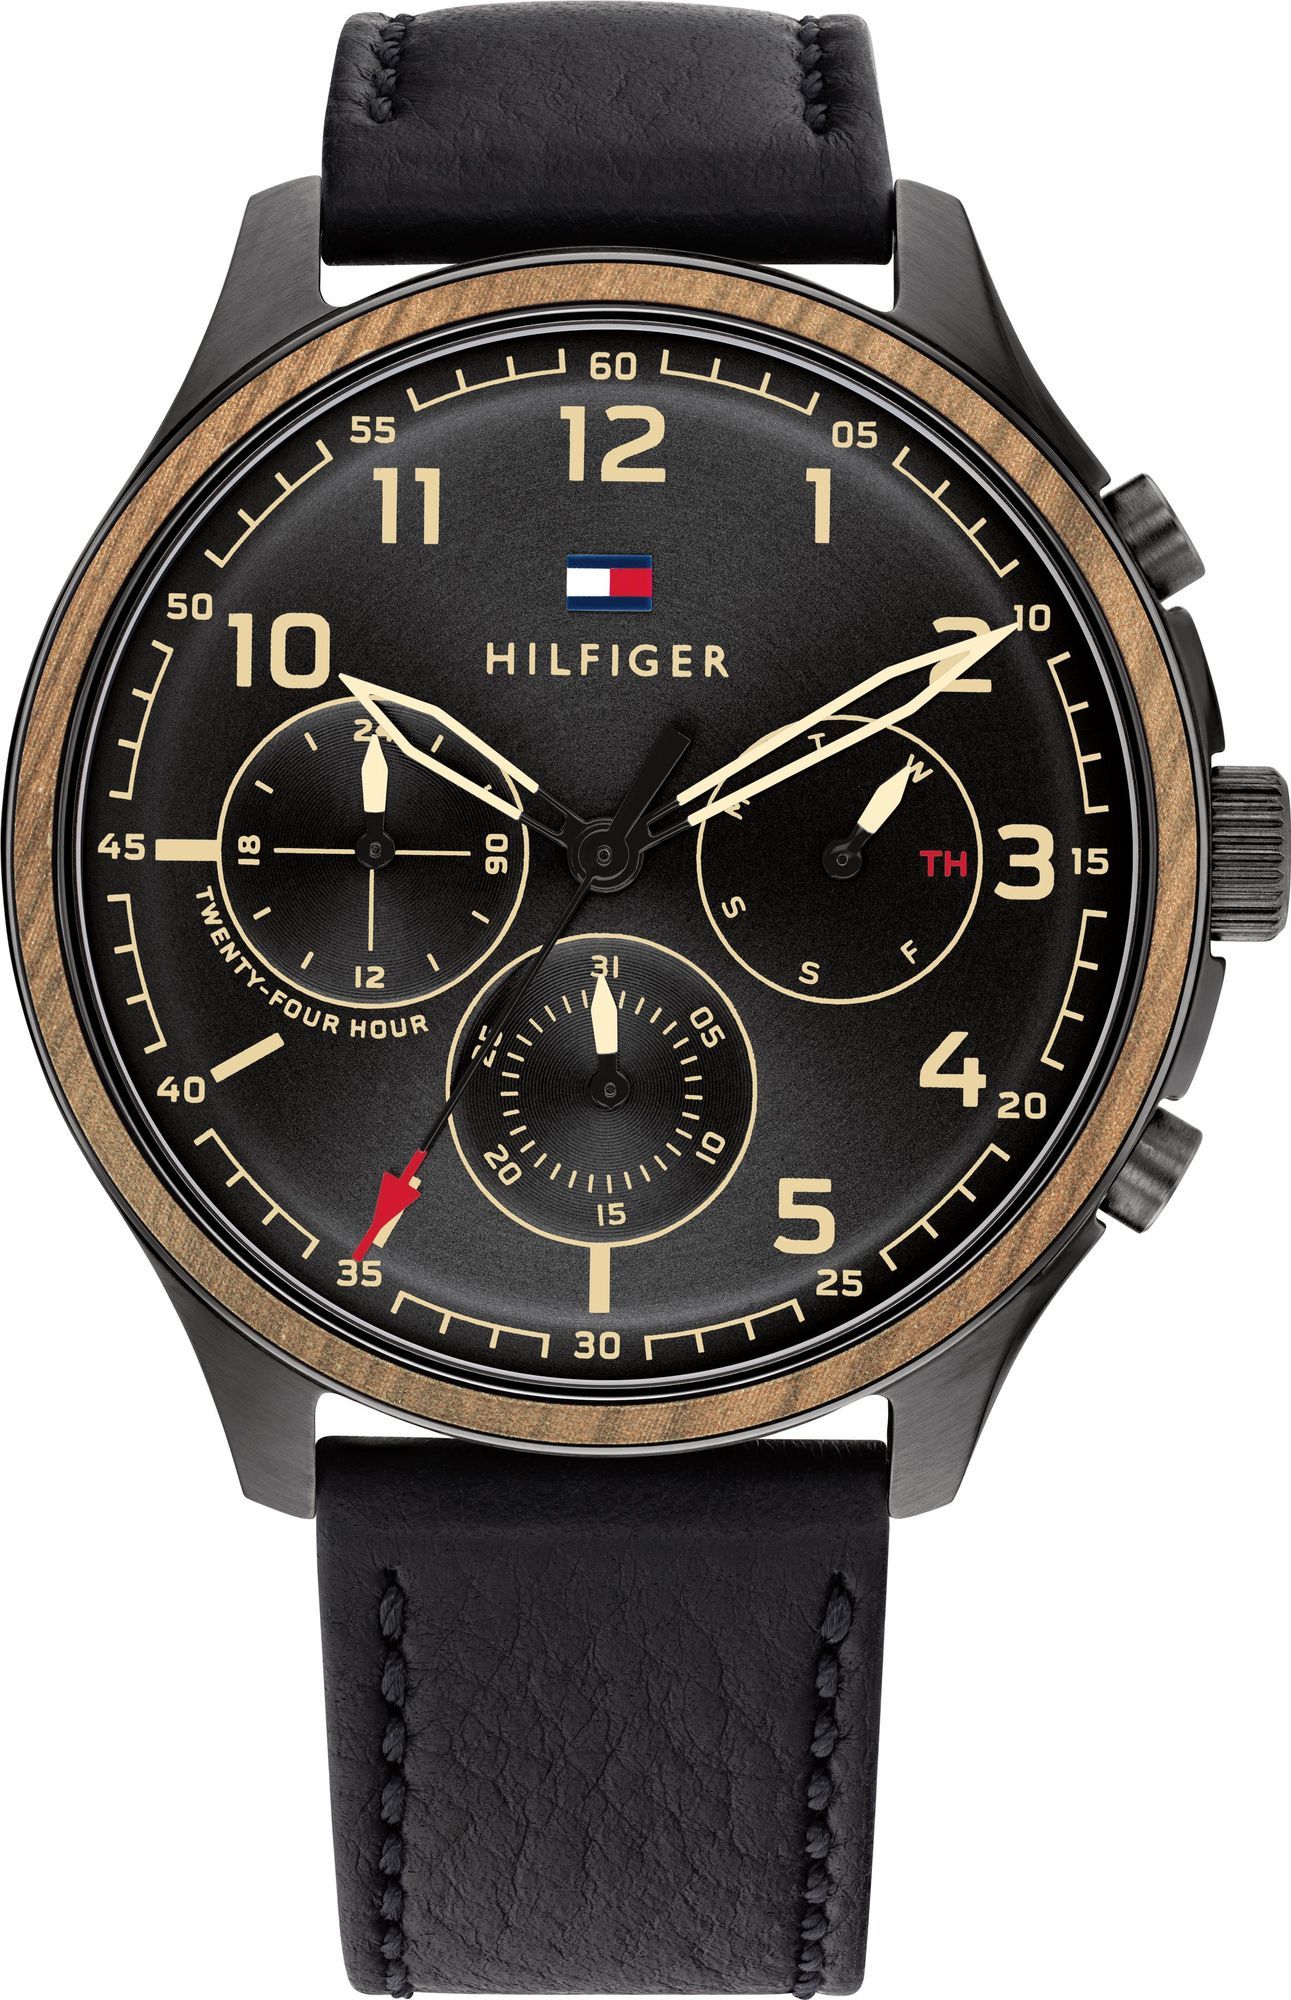 This Tommy Hilfiger Asher Multi Dial Watch for Men is the perfect timepiece to wear or to gift. It's Black 43 mm Round case combined with the comfortable Black Leather watch band will ensure you enjoy this stunning timepiece without any compromise. Operated by a high quality Quartz movement and water resistant to 5 bars, your watch will keep ticking. This classic watch gives a comfortable feeling with its leather strap, it's perfect for every occasion -The watch has a calendar function: Day-Date, 24-hour Display High quality 21 cm length and 20 mm width Black Leather strap with a Buckle Case diameter: 43 mm,case thickness: 11 mm, case colour: Black and dial colour: Black